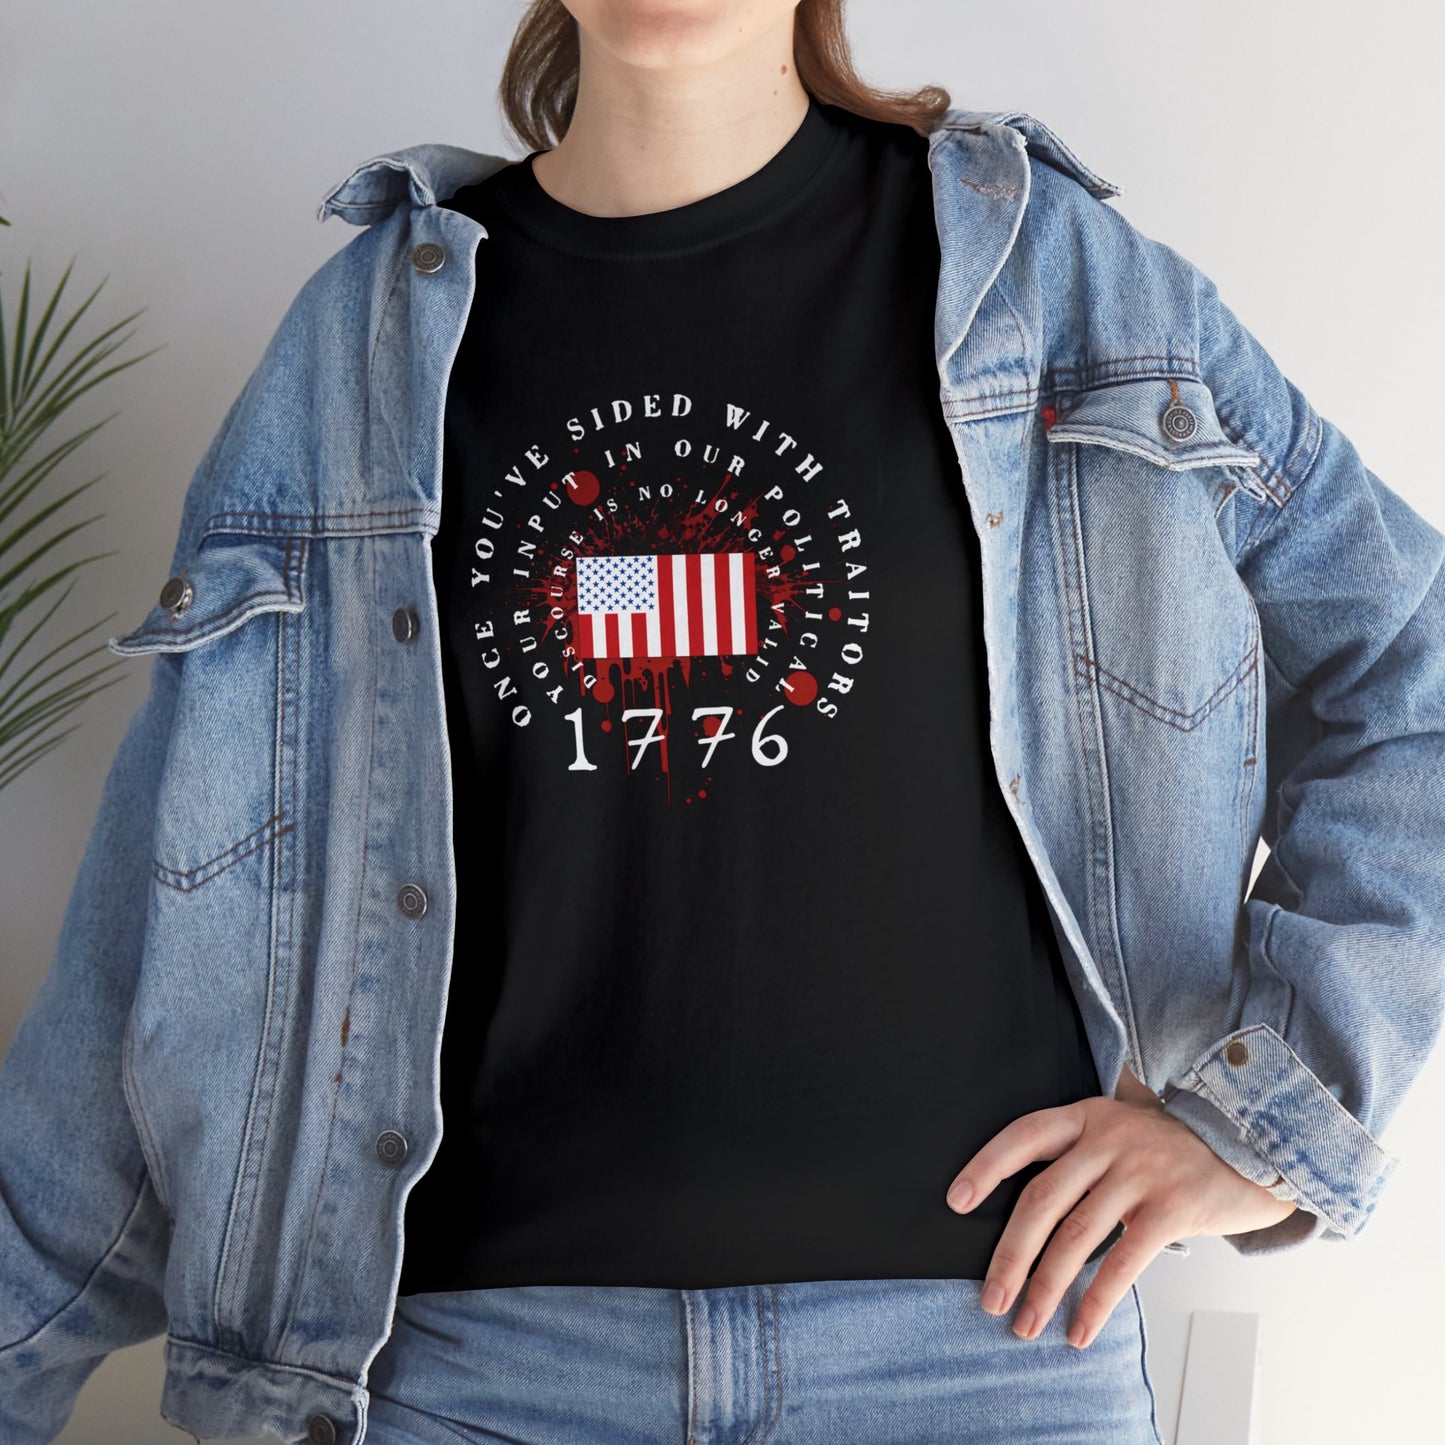 Once You've Sided With Traitors - Flag Unisex Heavy Cotton Tee (Gildan)